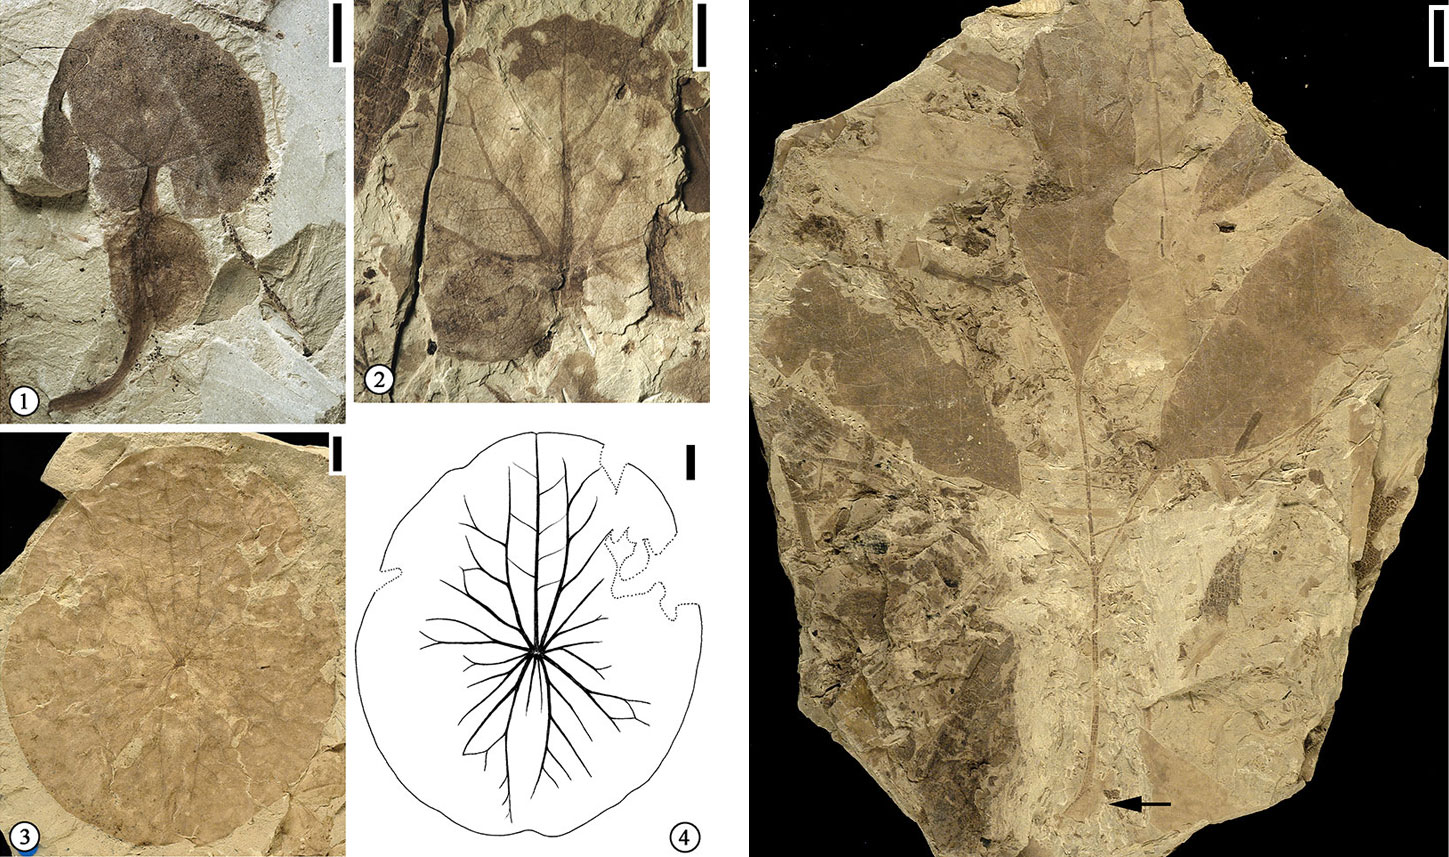 Photos of fossil leaves from the Dakota Formation of Kanas, including cordate of oval floating leaves of aquatic plants and a compound leaf from a tree or shrub with three leaflets.